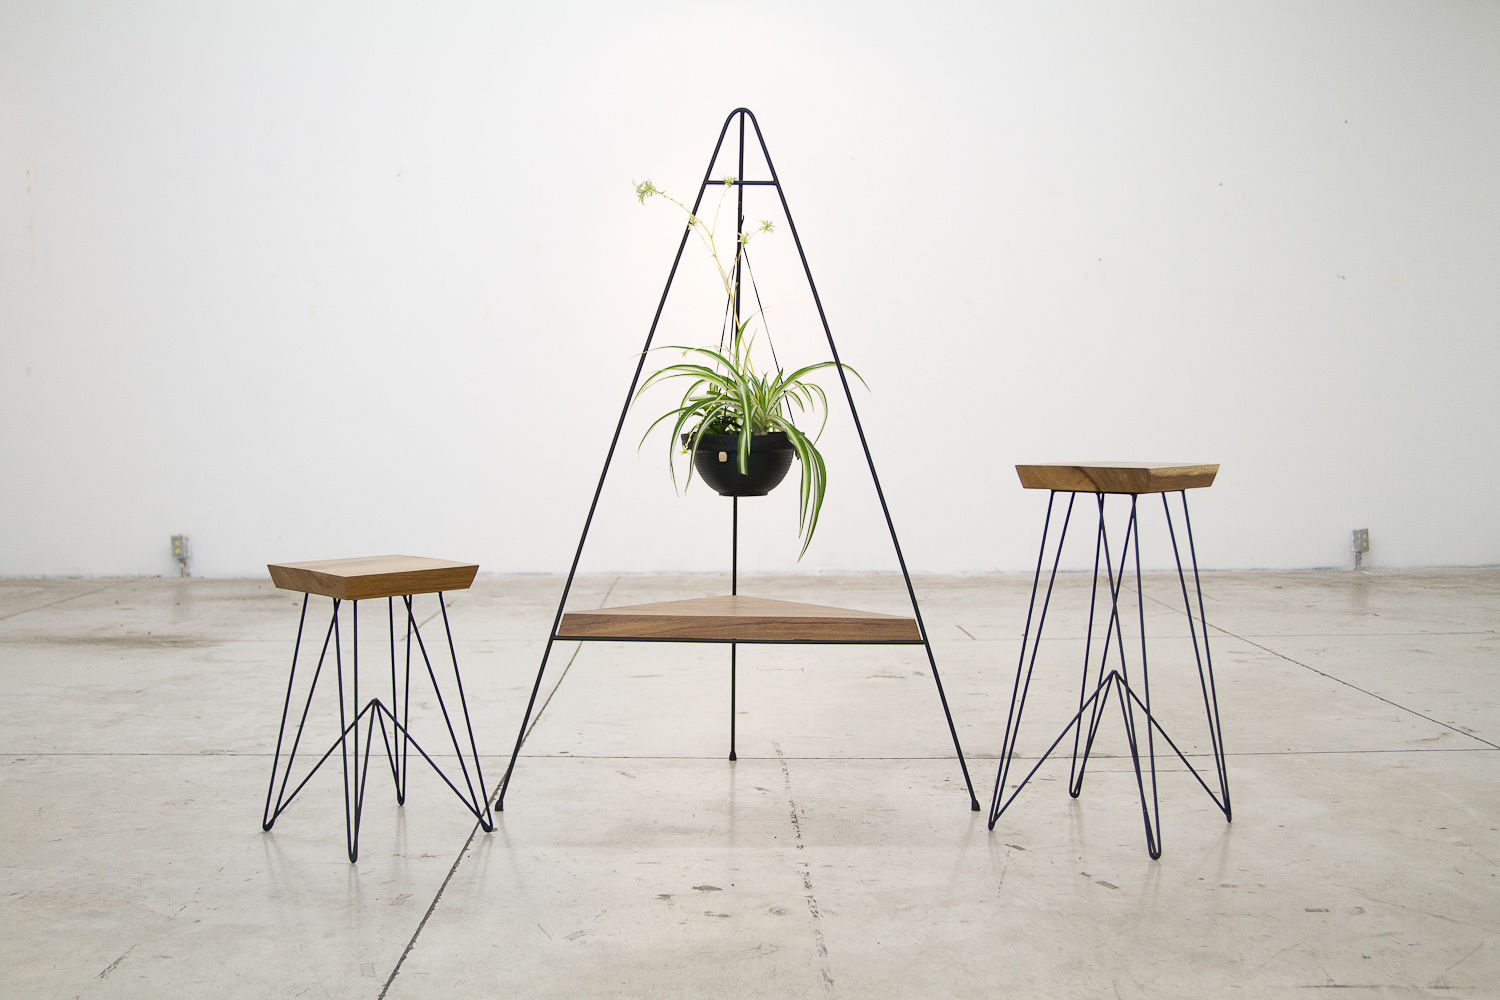 Planter Colection Series , The Curious The Curious Minimalist style garden